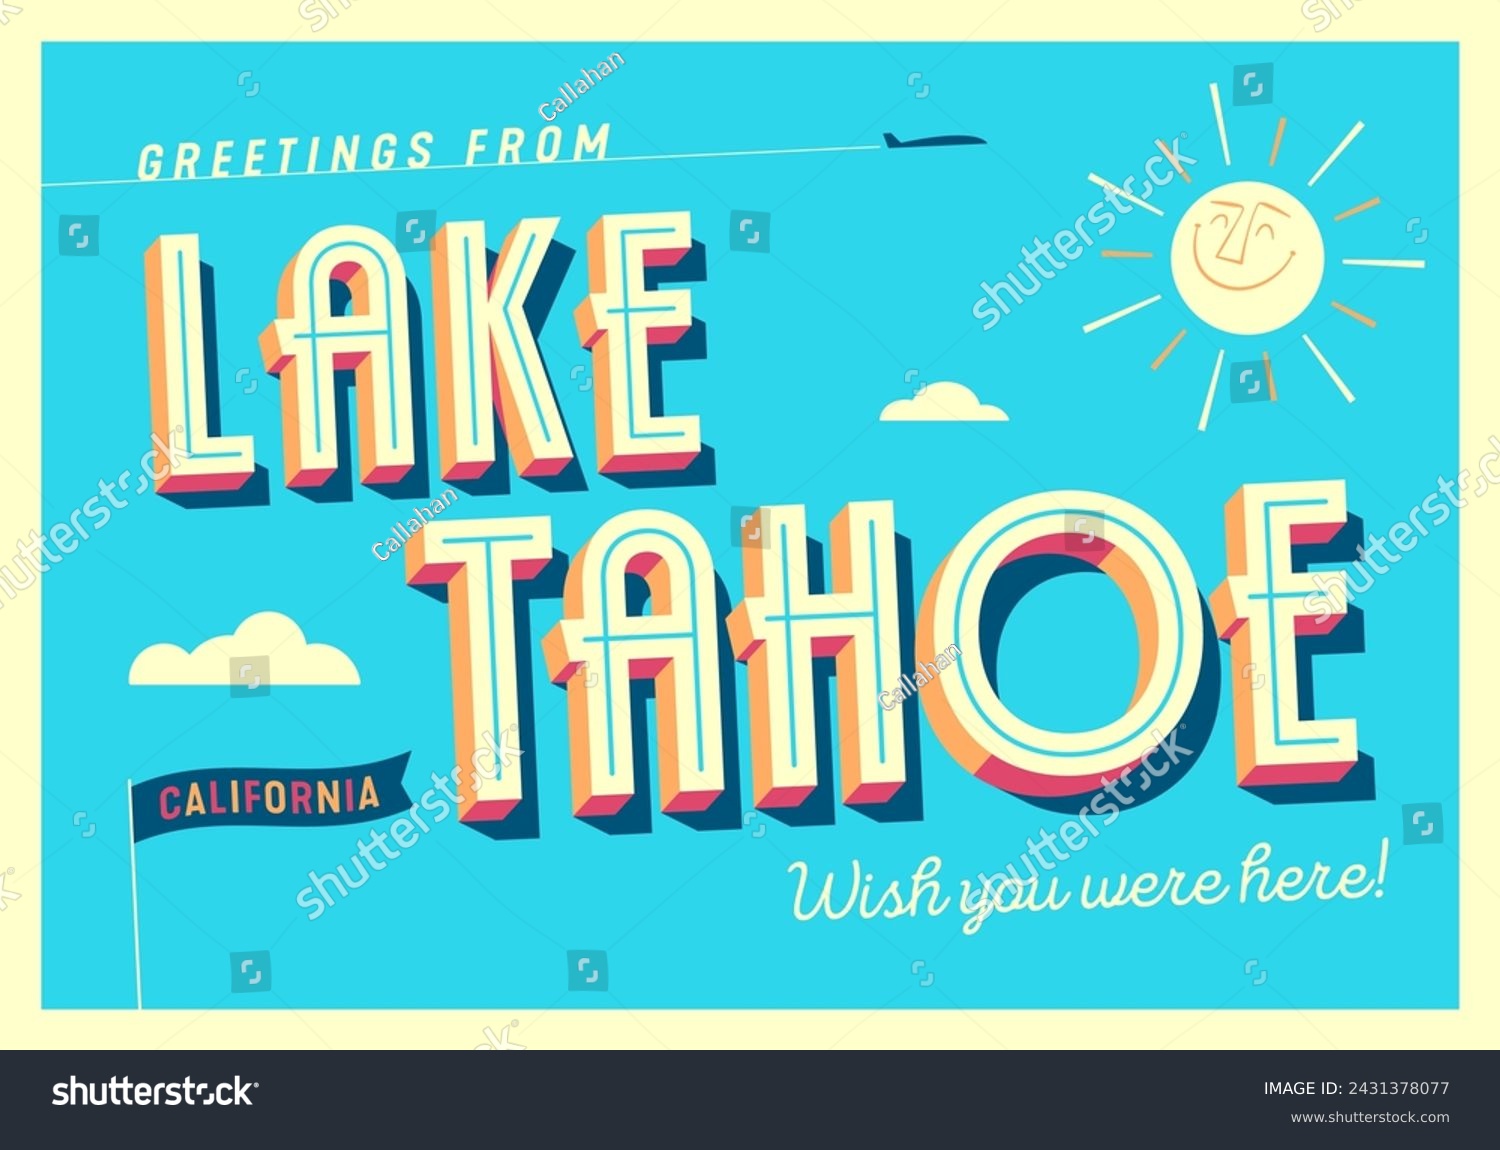 SVG of Greetings from Lake Tahoe, California, USA - Wish you were here! - Touristic Postcard. Vector EPS10. svg